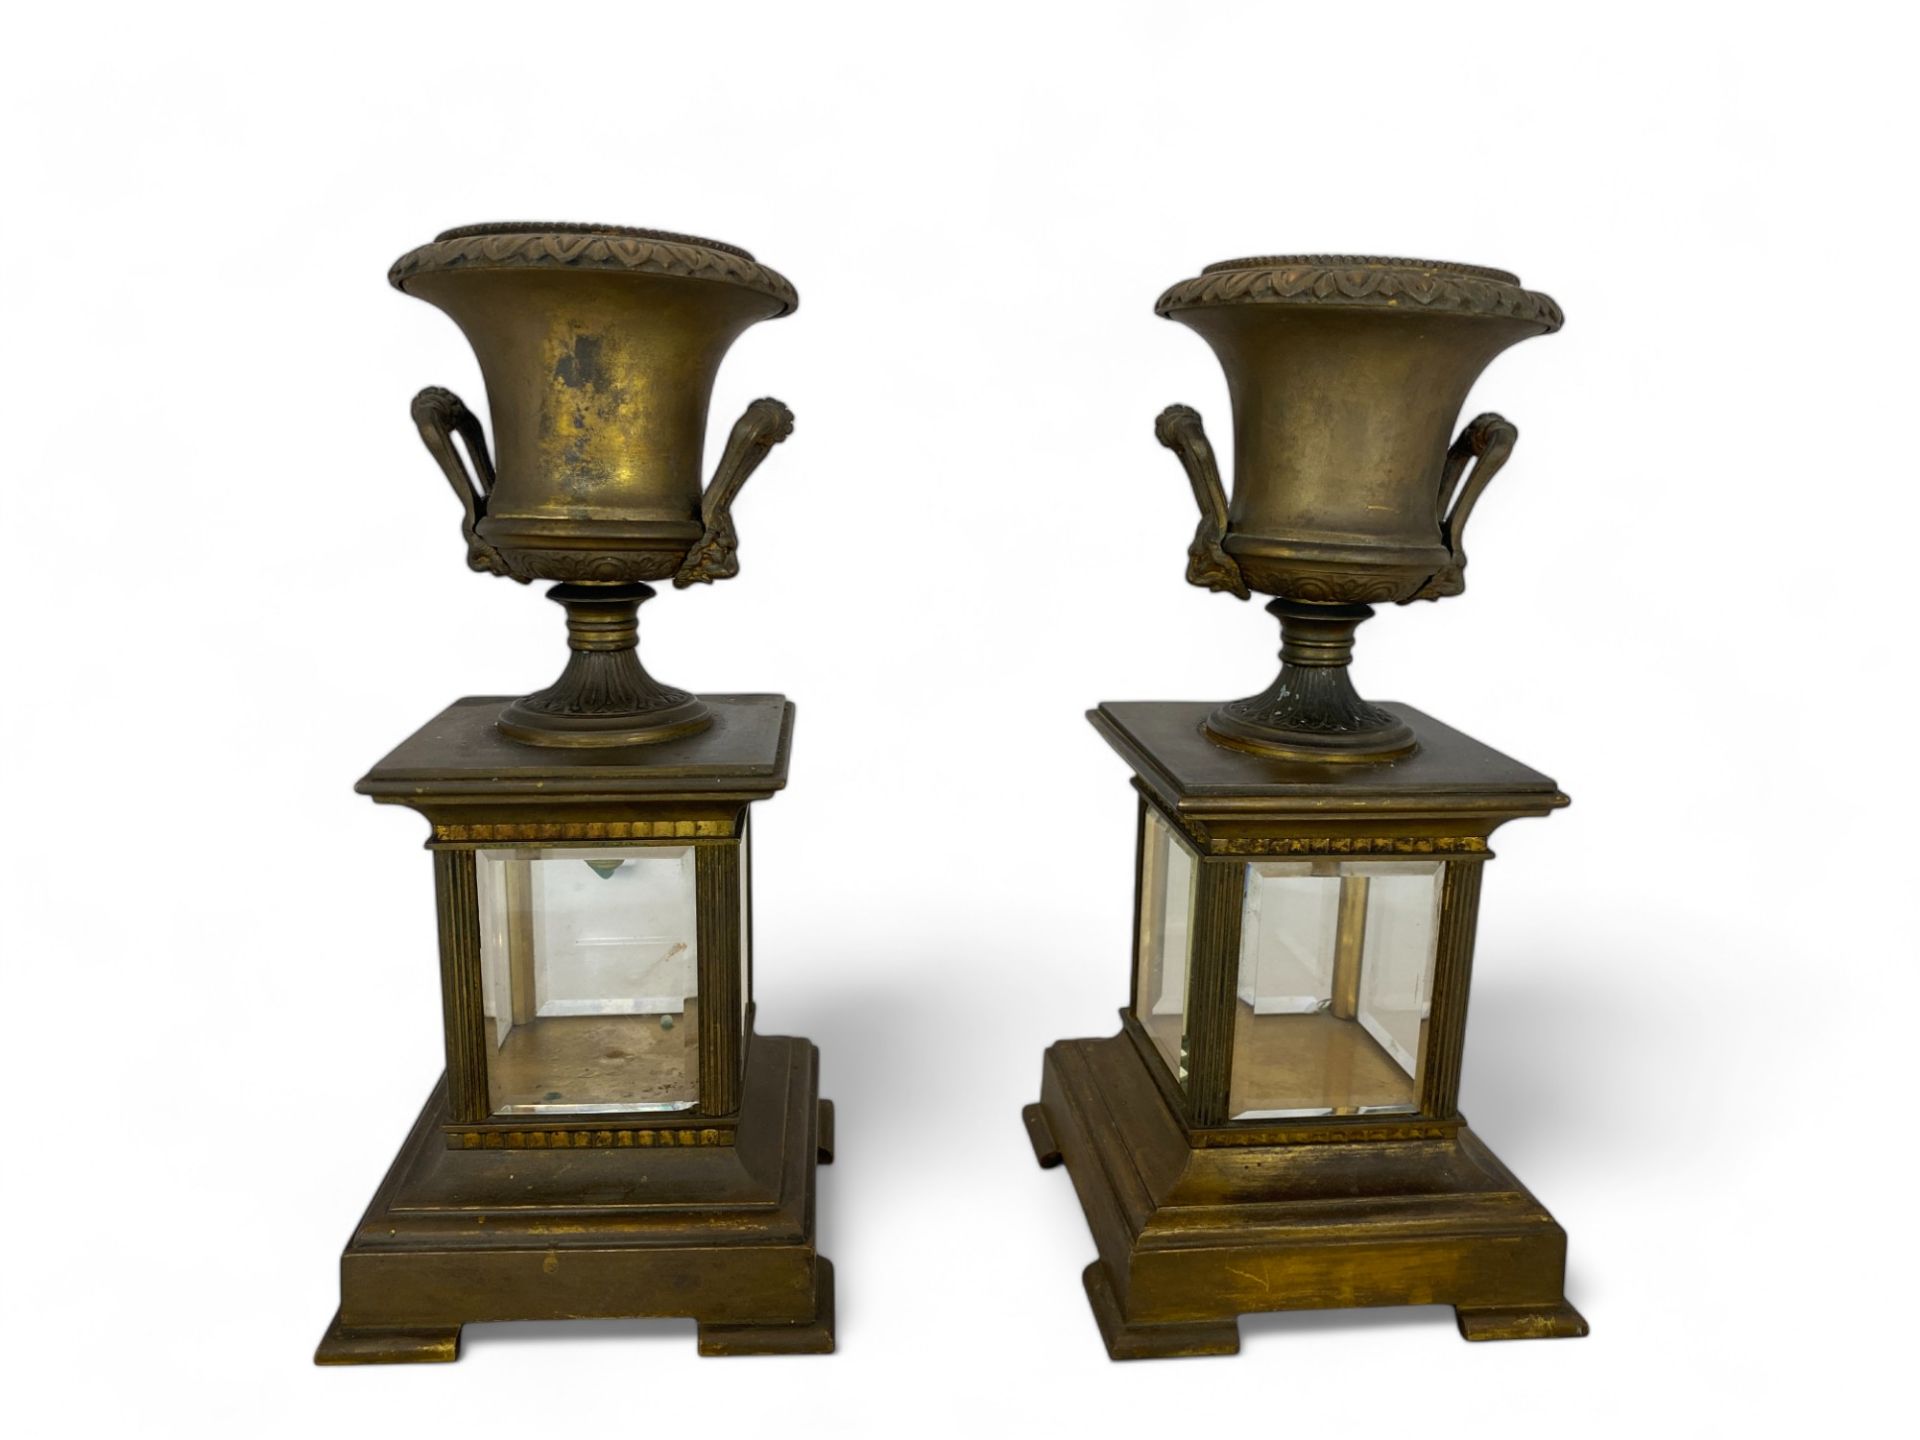 A pair of 19th century gilt bronze chimney ornaments - Image 9 of 12